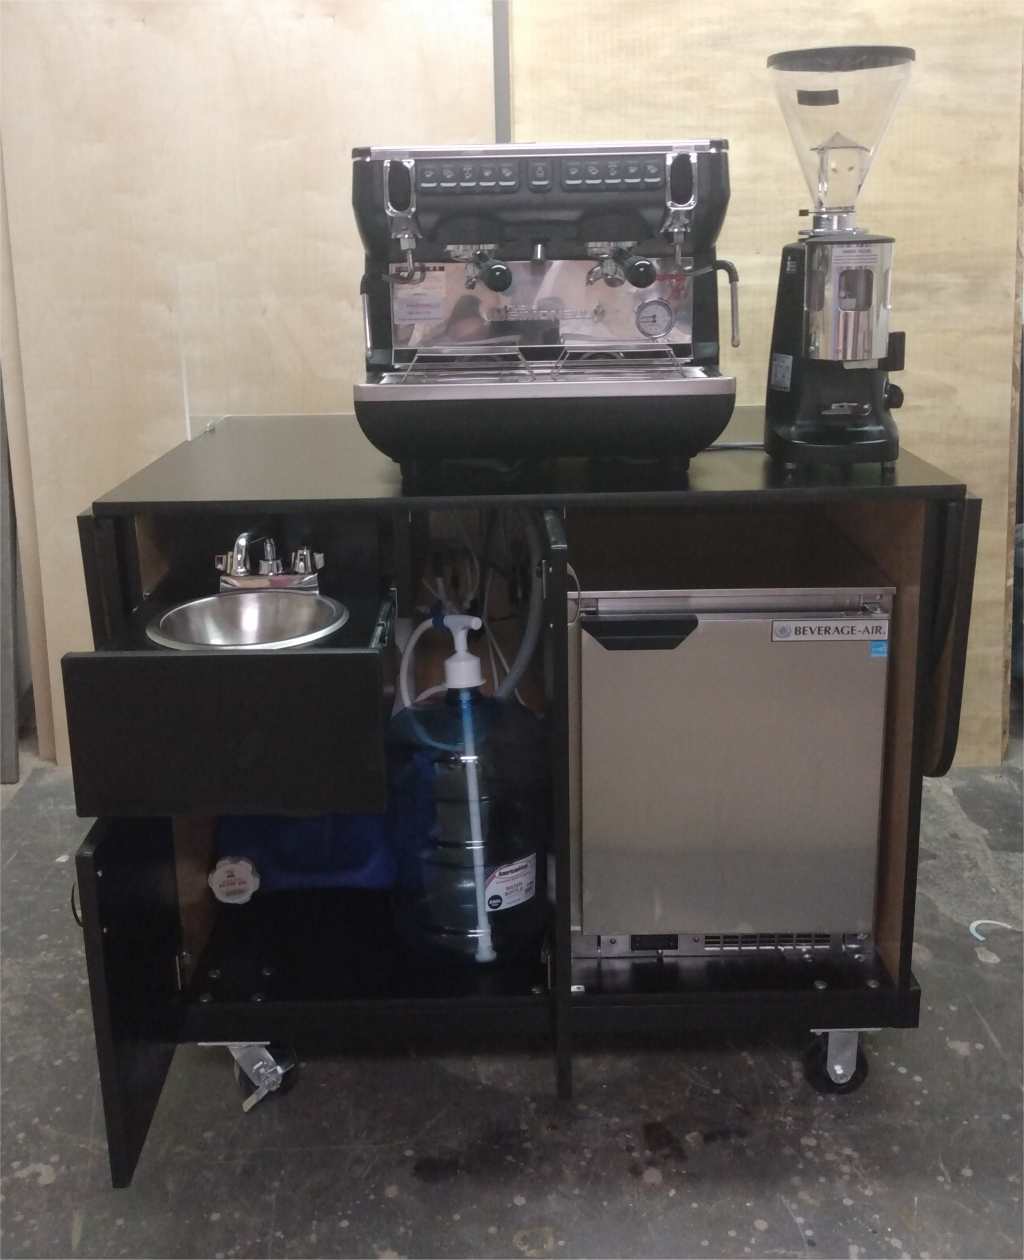 4 foot classic espresso cart opened up to show plumbing